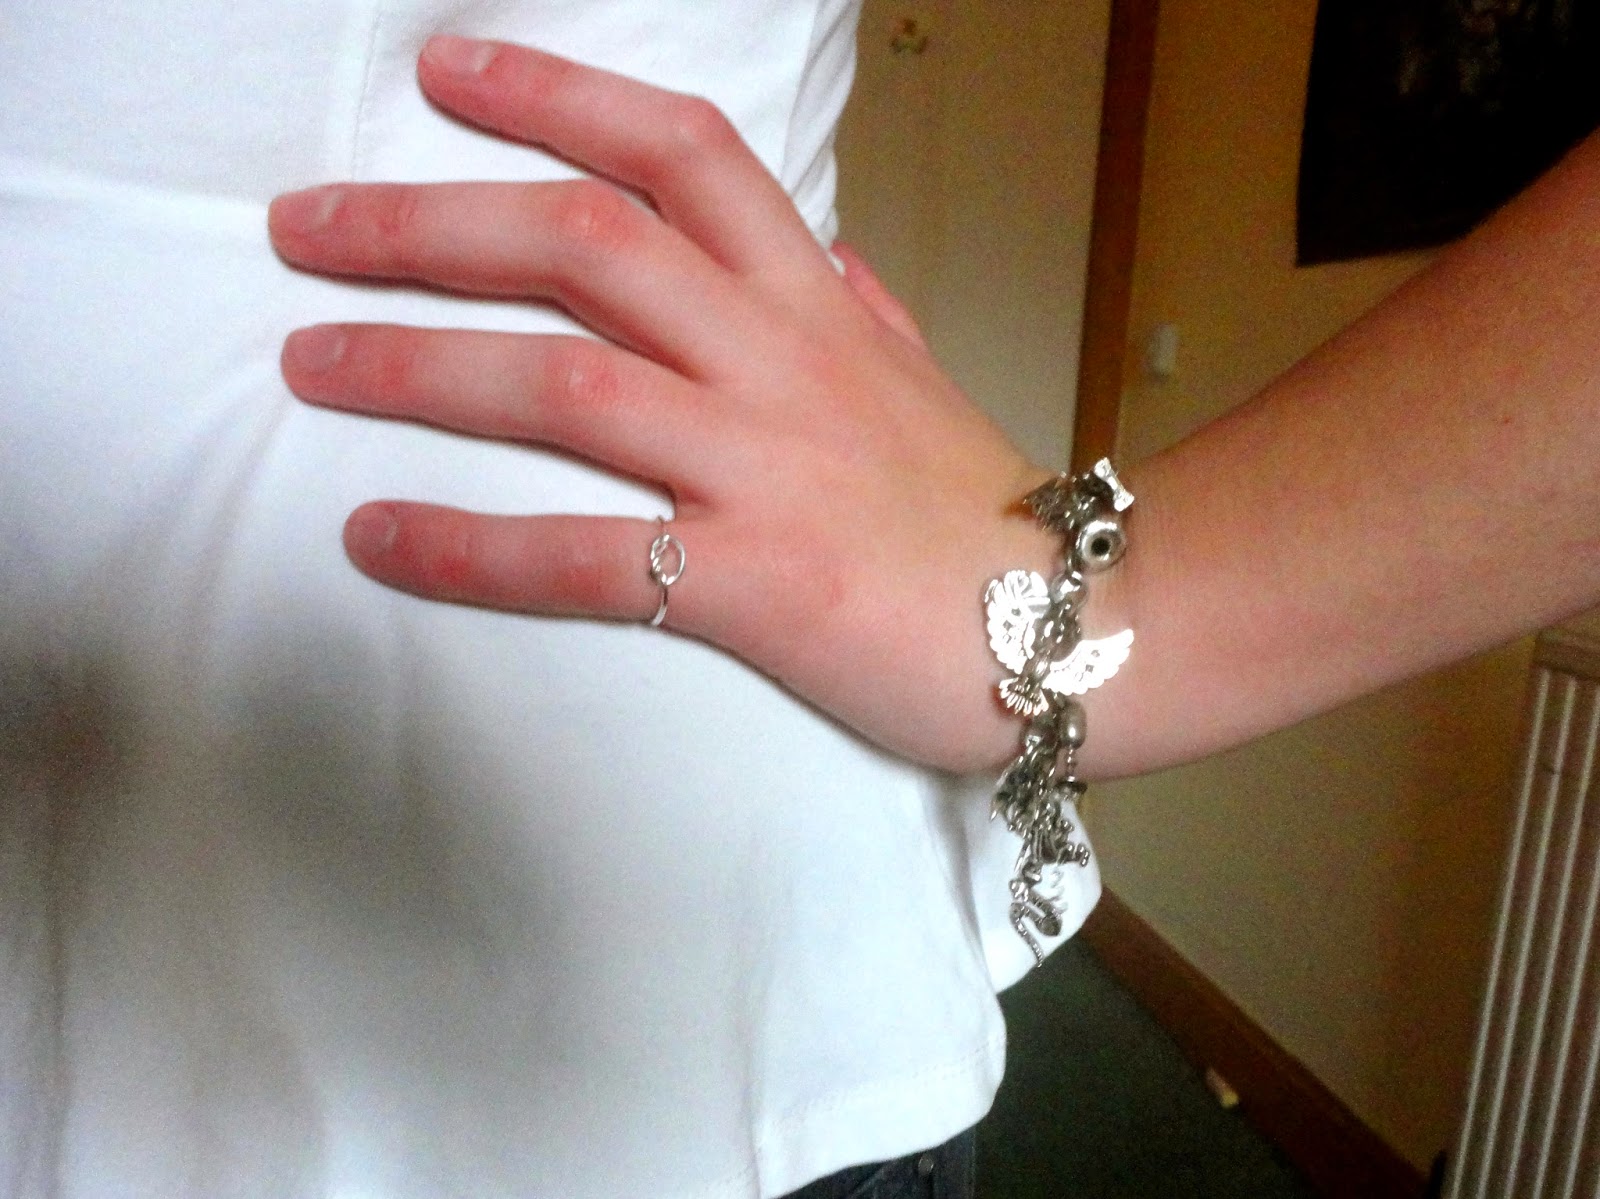 Outfit jewellery details - silver knot ring and Harry Potter charm bracelet